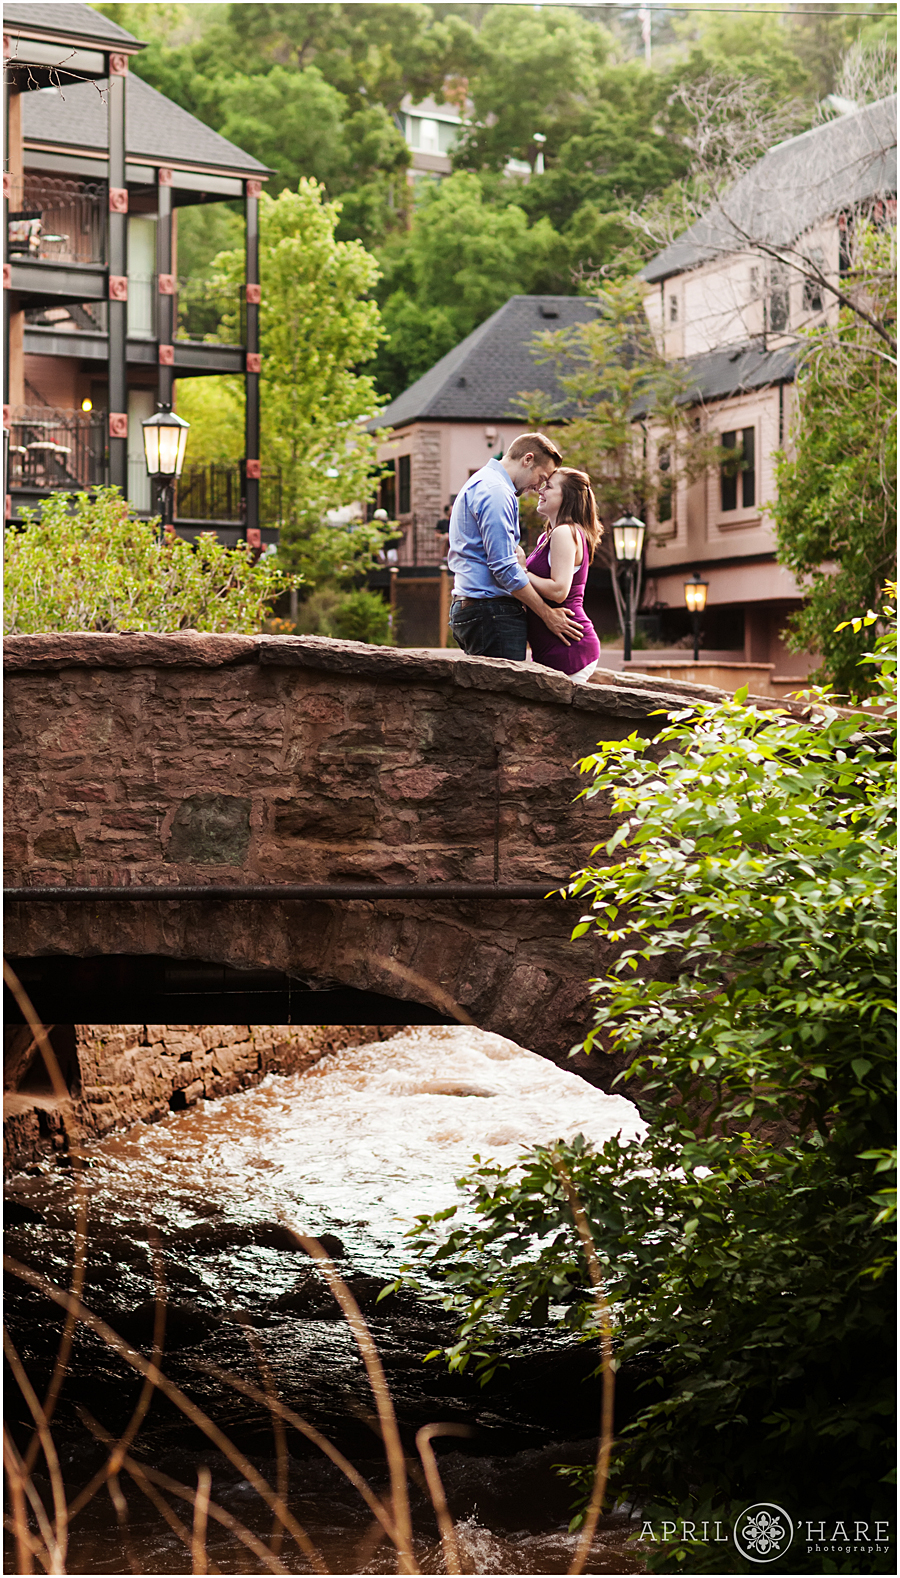 Pretty stone bridge in the picturesque town of Manitou Springs for an engagement photography session